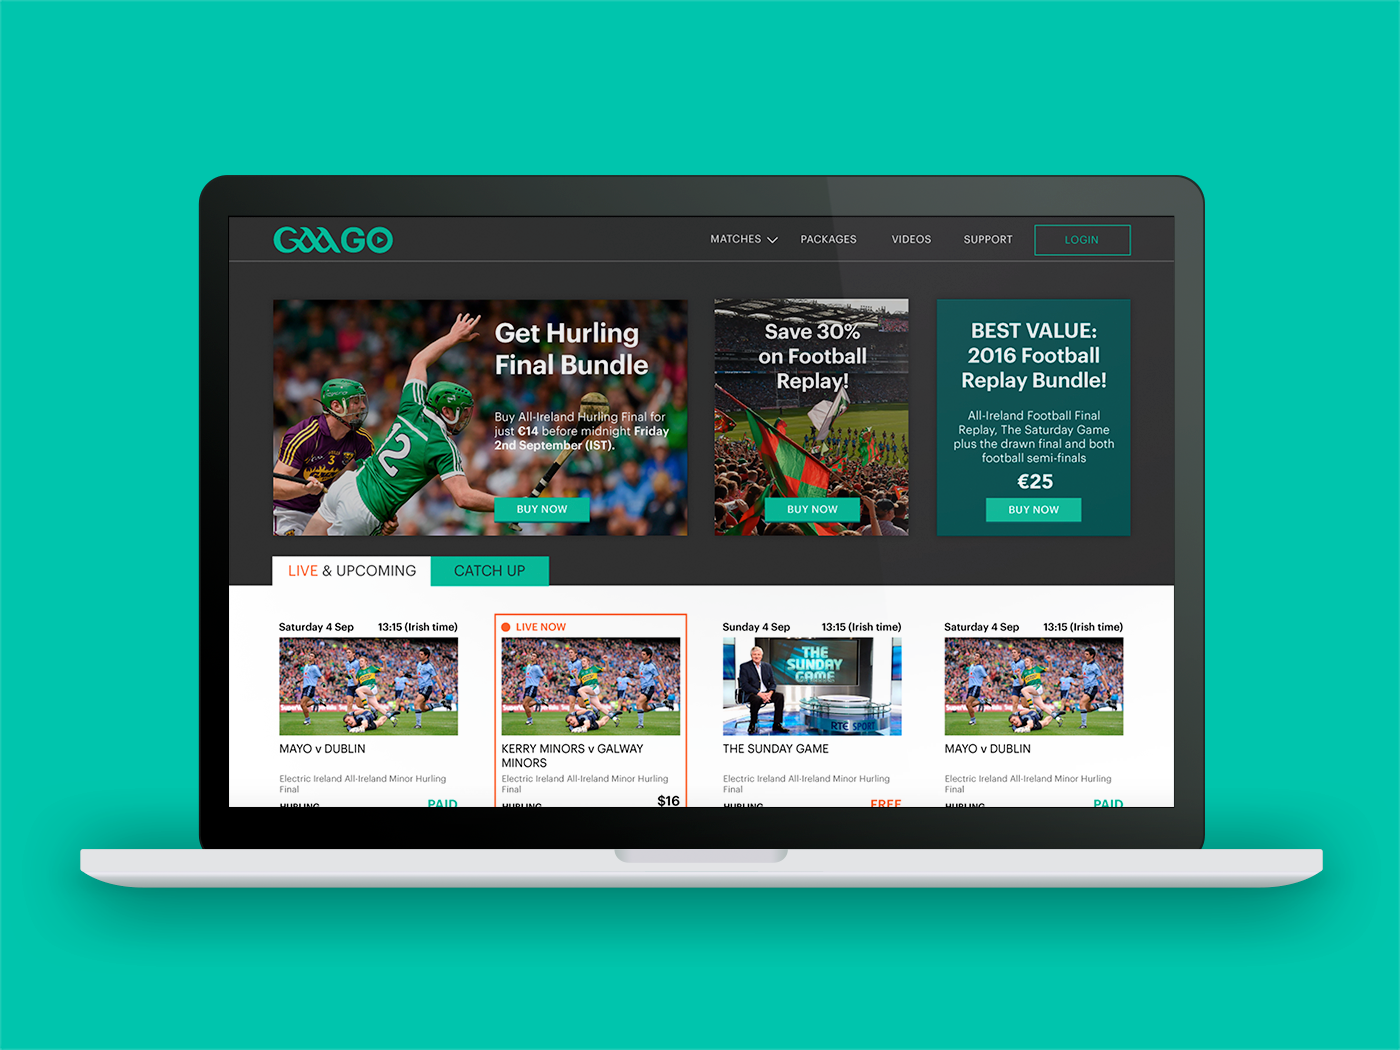 GAAGO Home page